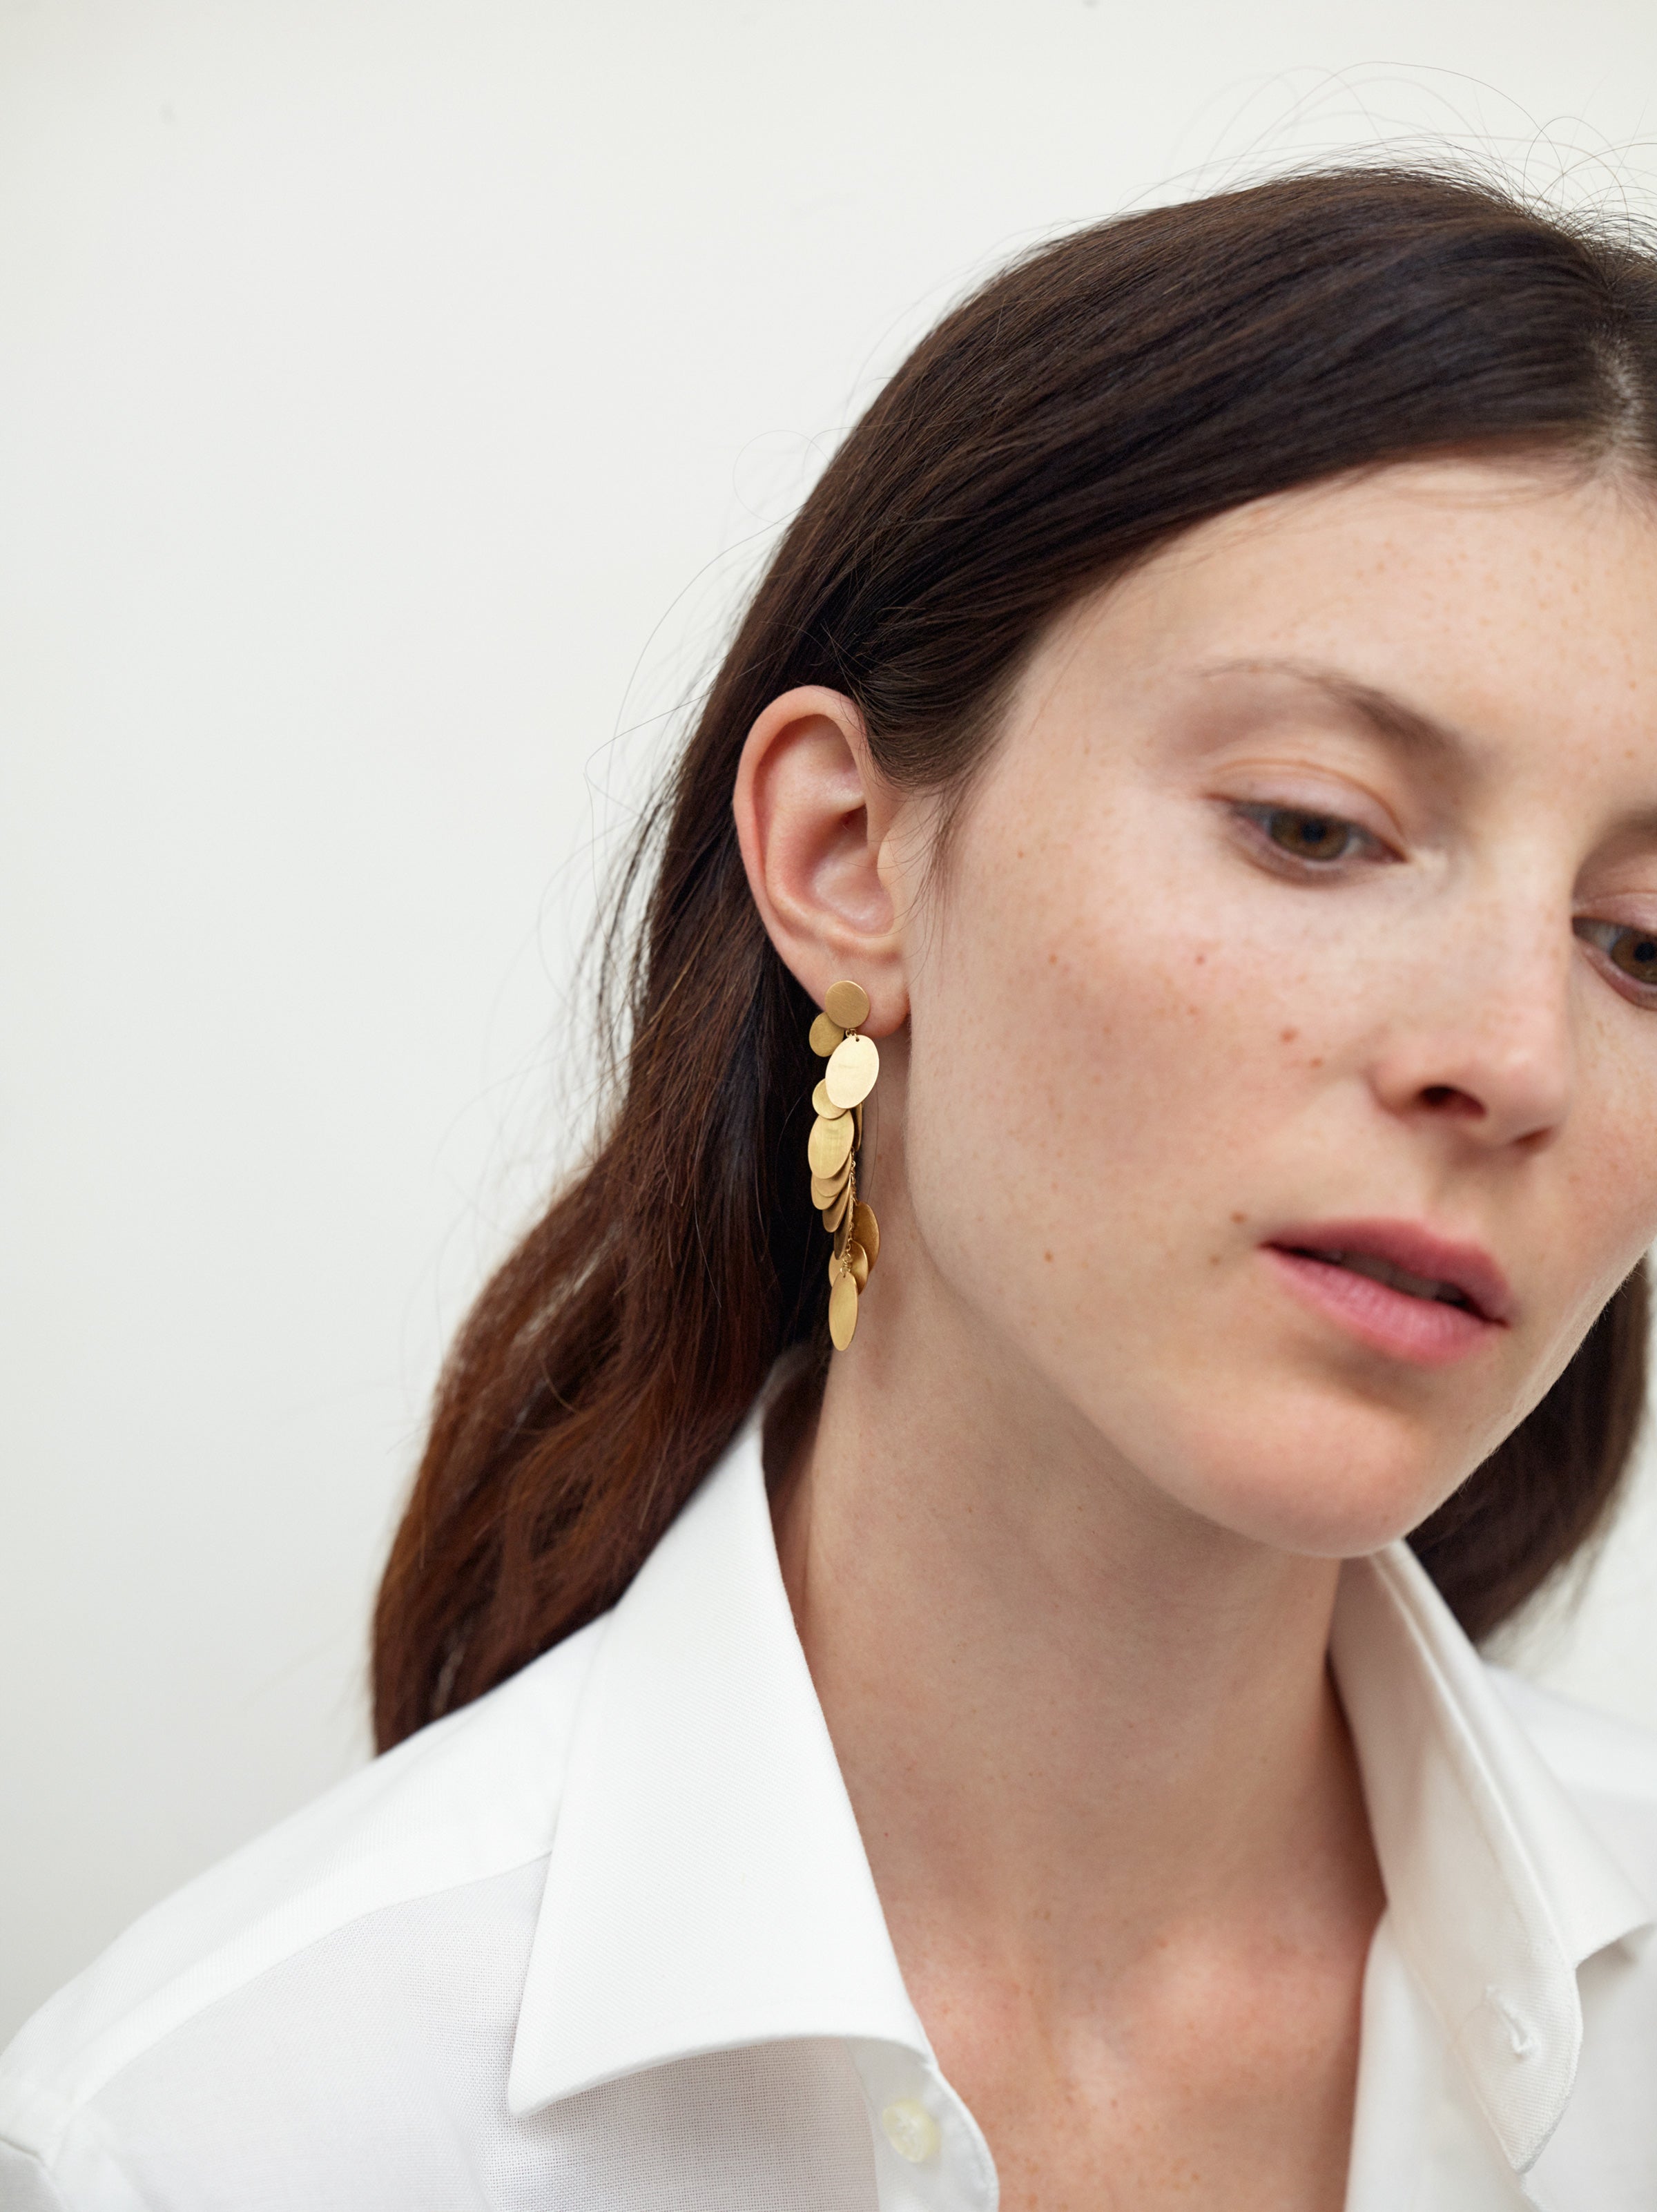 18KT yellow gold hanging earrings (height 6CM) worn by a female ear – Pianissimo